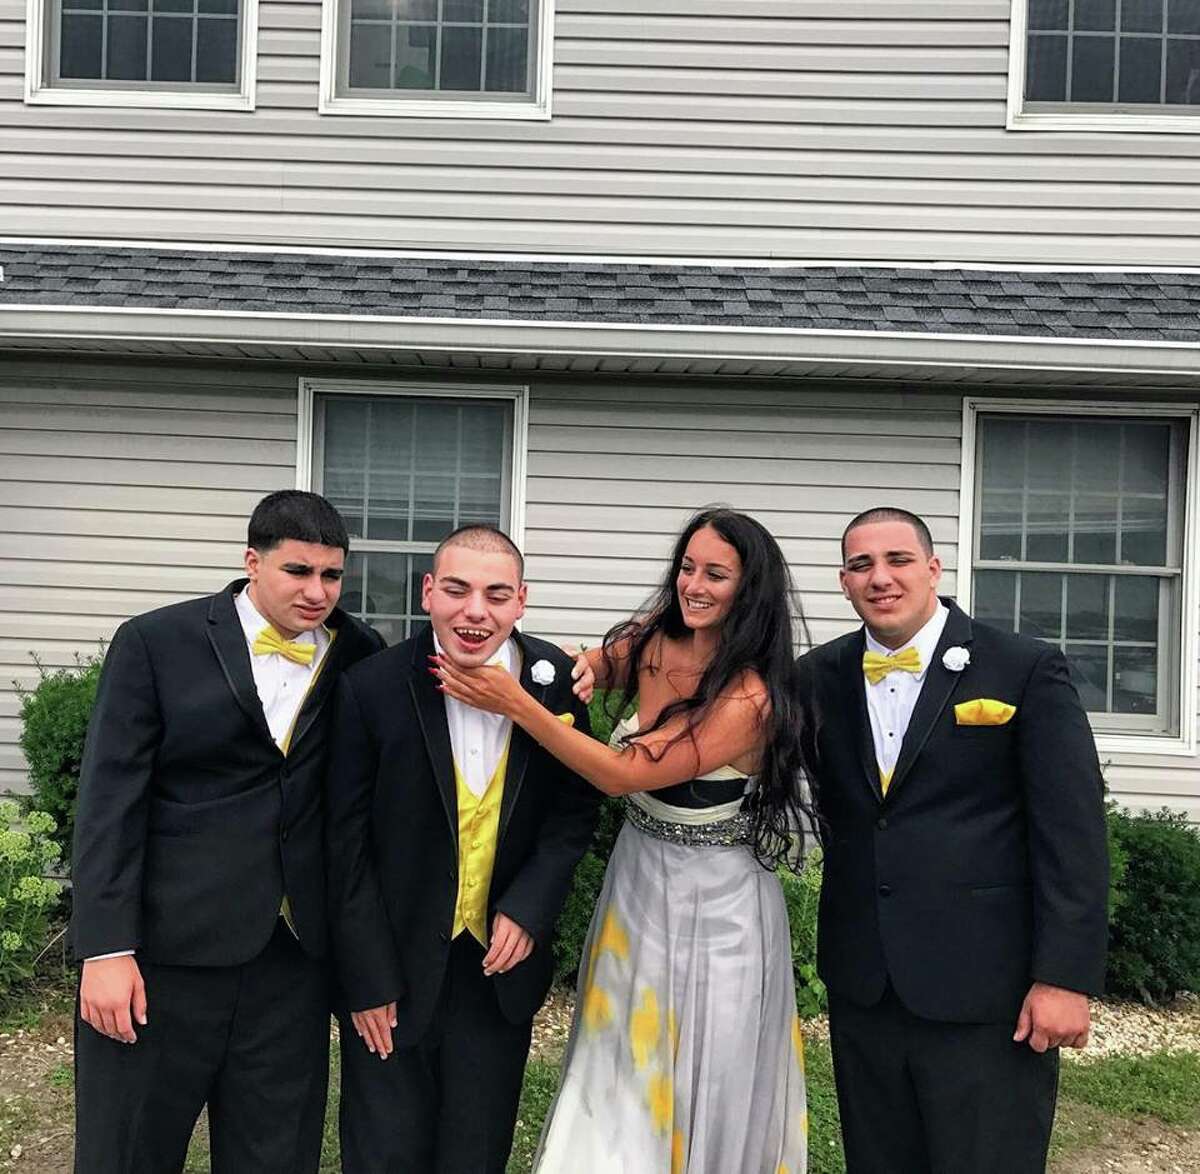 Ali Carbone and her three brothers, all of whom have autism.